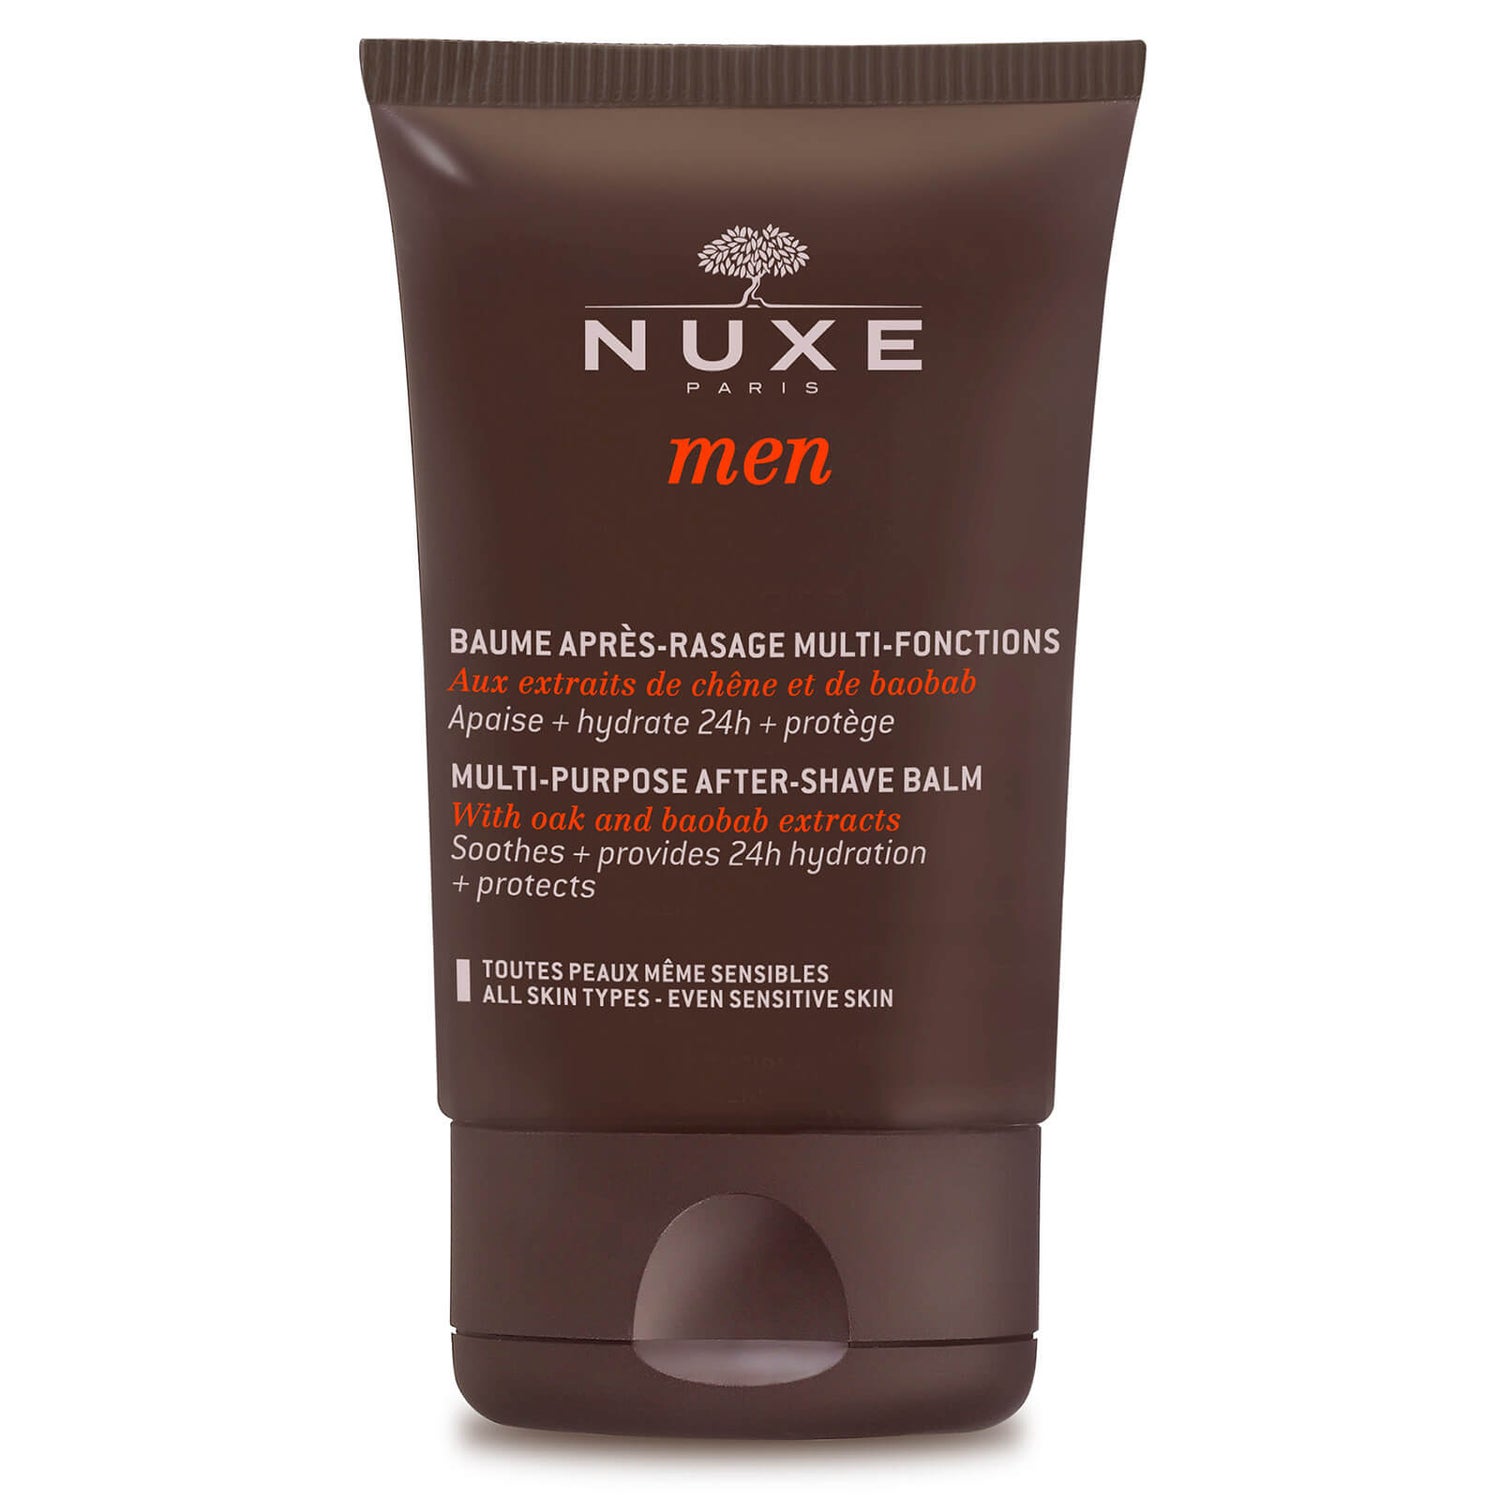 After-Shave Balm, NUXE Men 50 ml